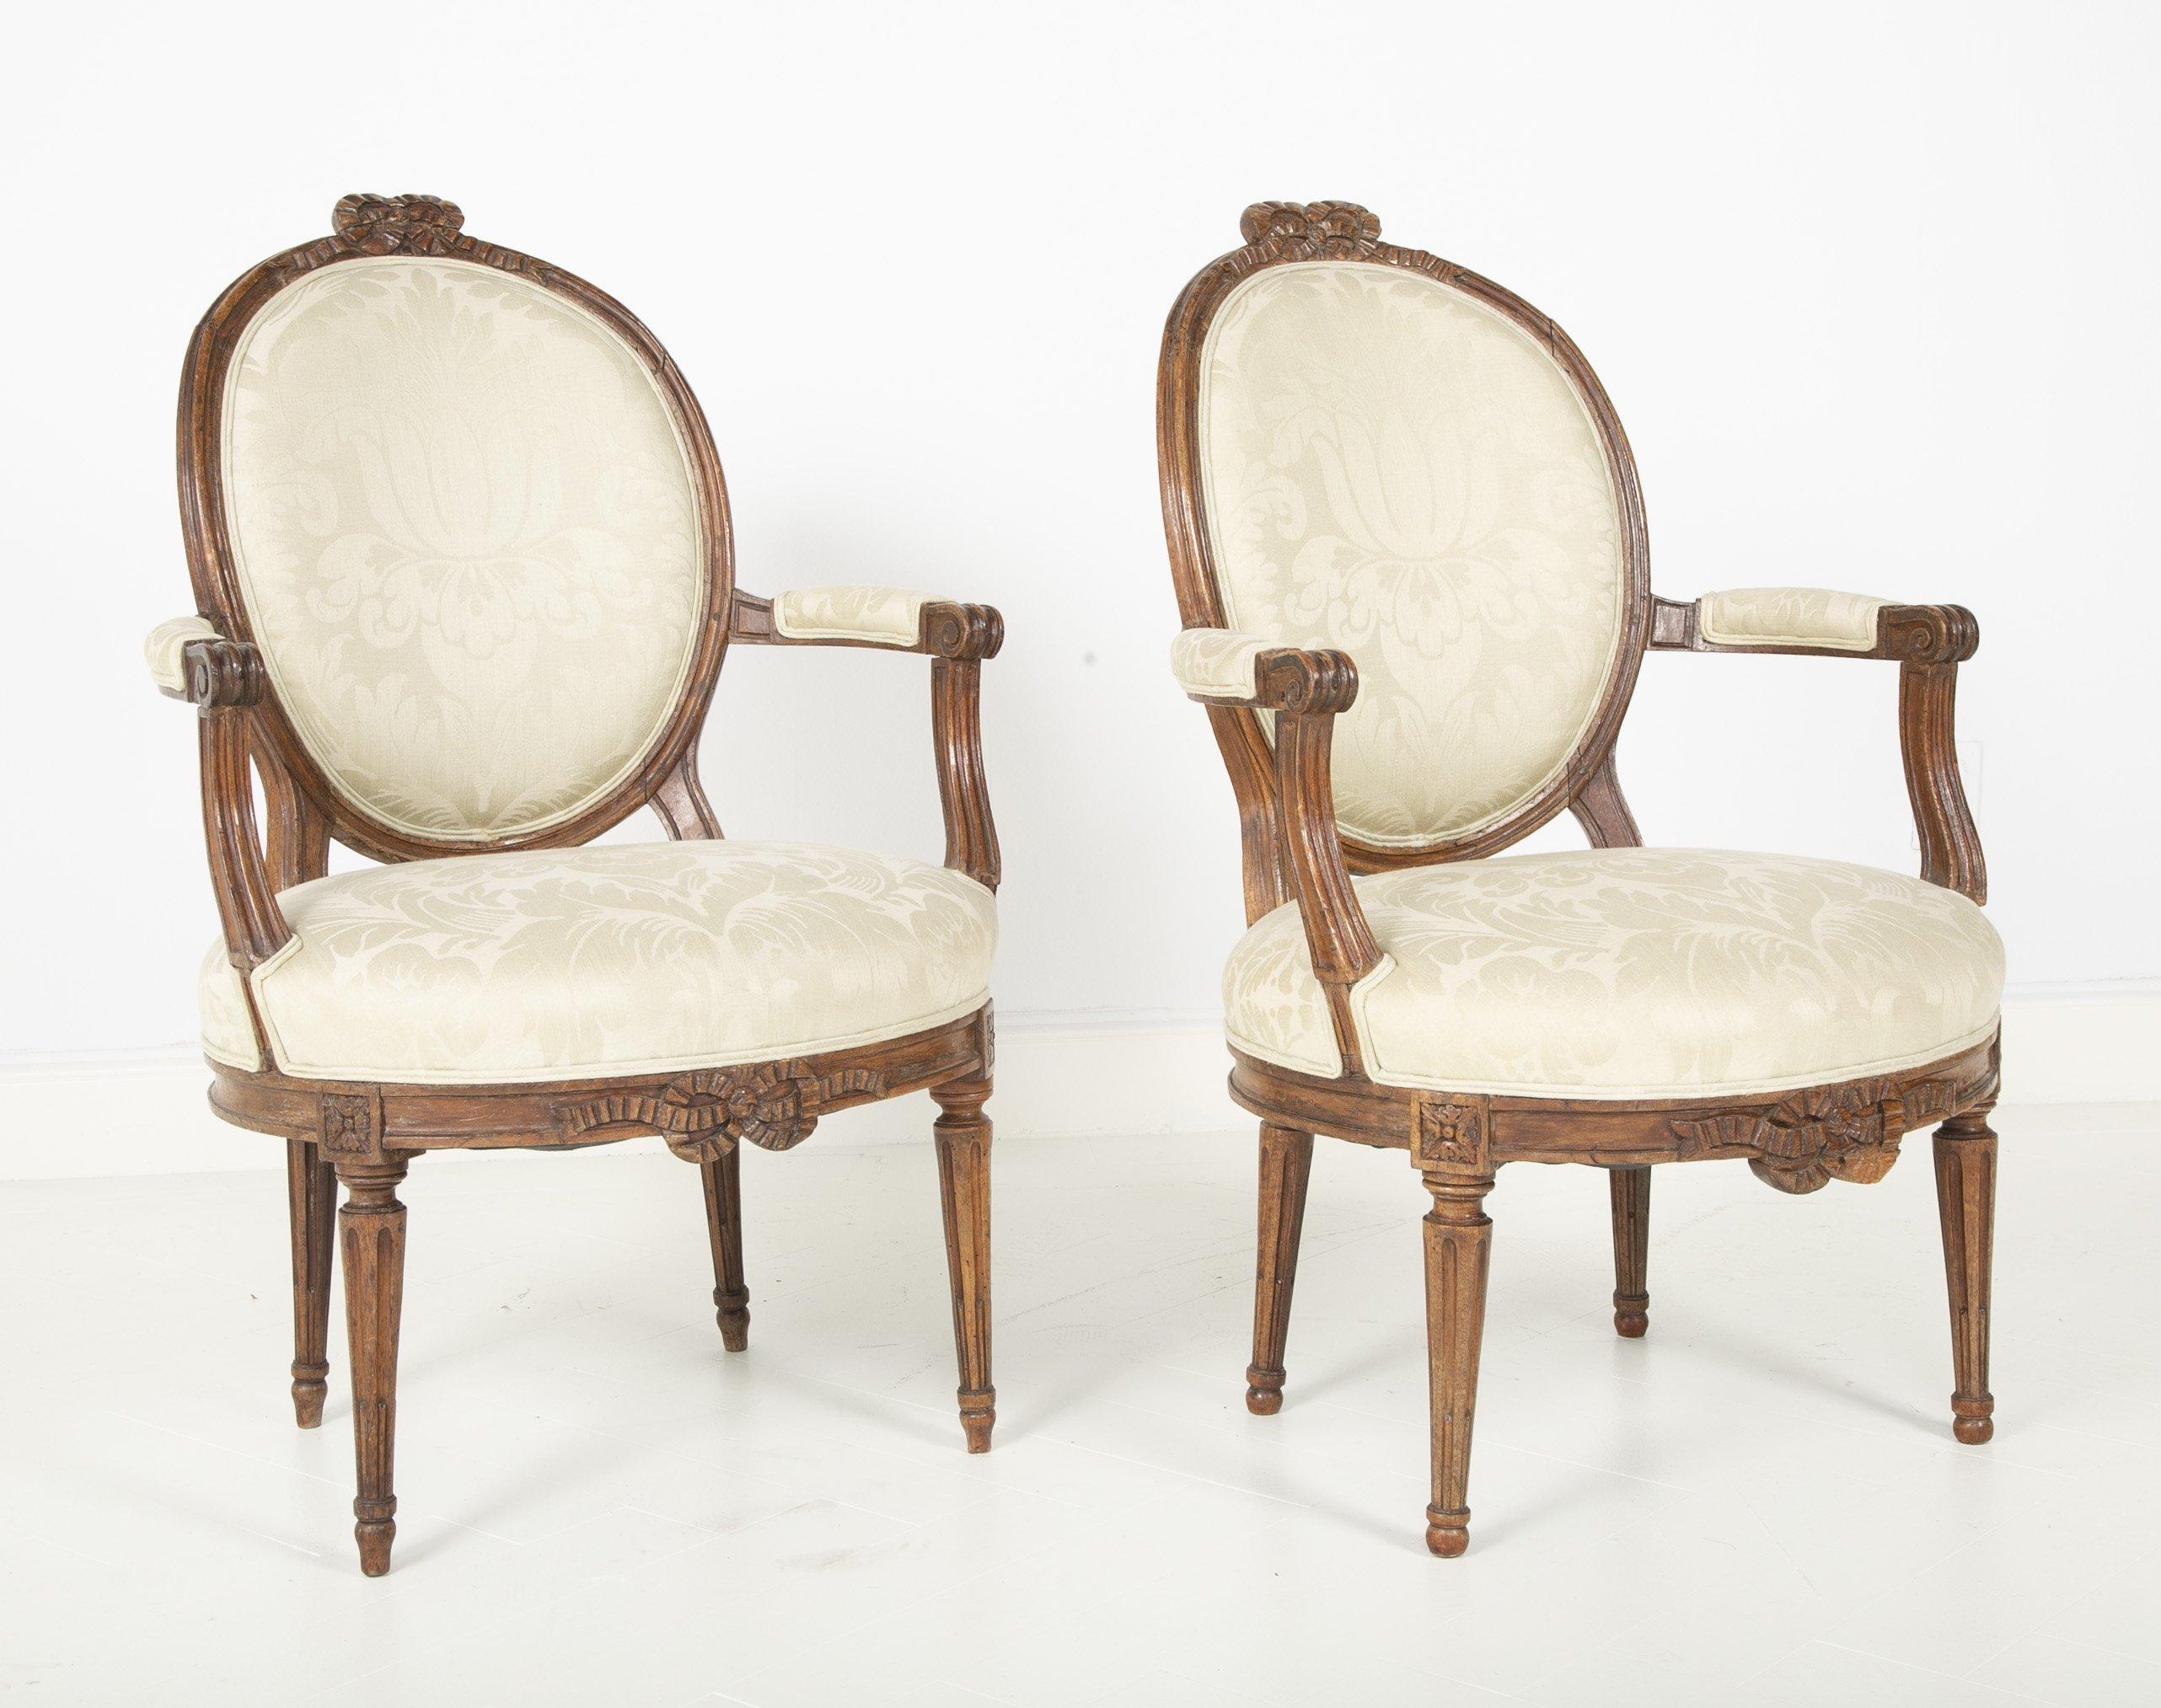 Pair of Louis XVI period oval back walnut fauteuil with stop fluted legs, bowknot and ribbon crest rail, and apron, circa 1780s.


We are proud of our long-standing partnership with George N Antiques who specializes in fine authentic antique